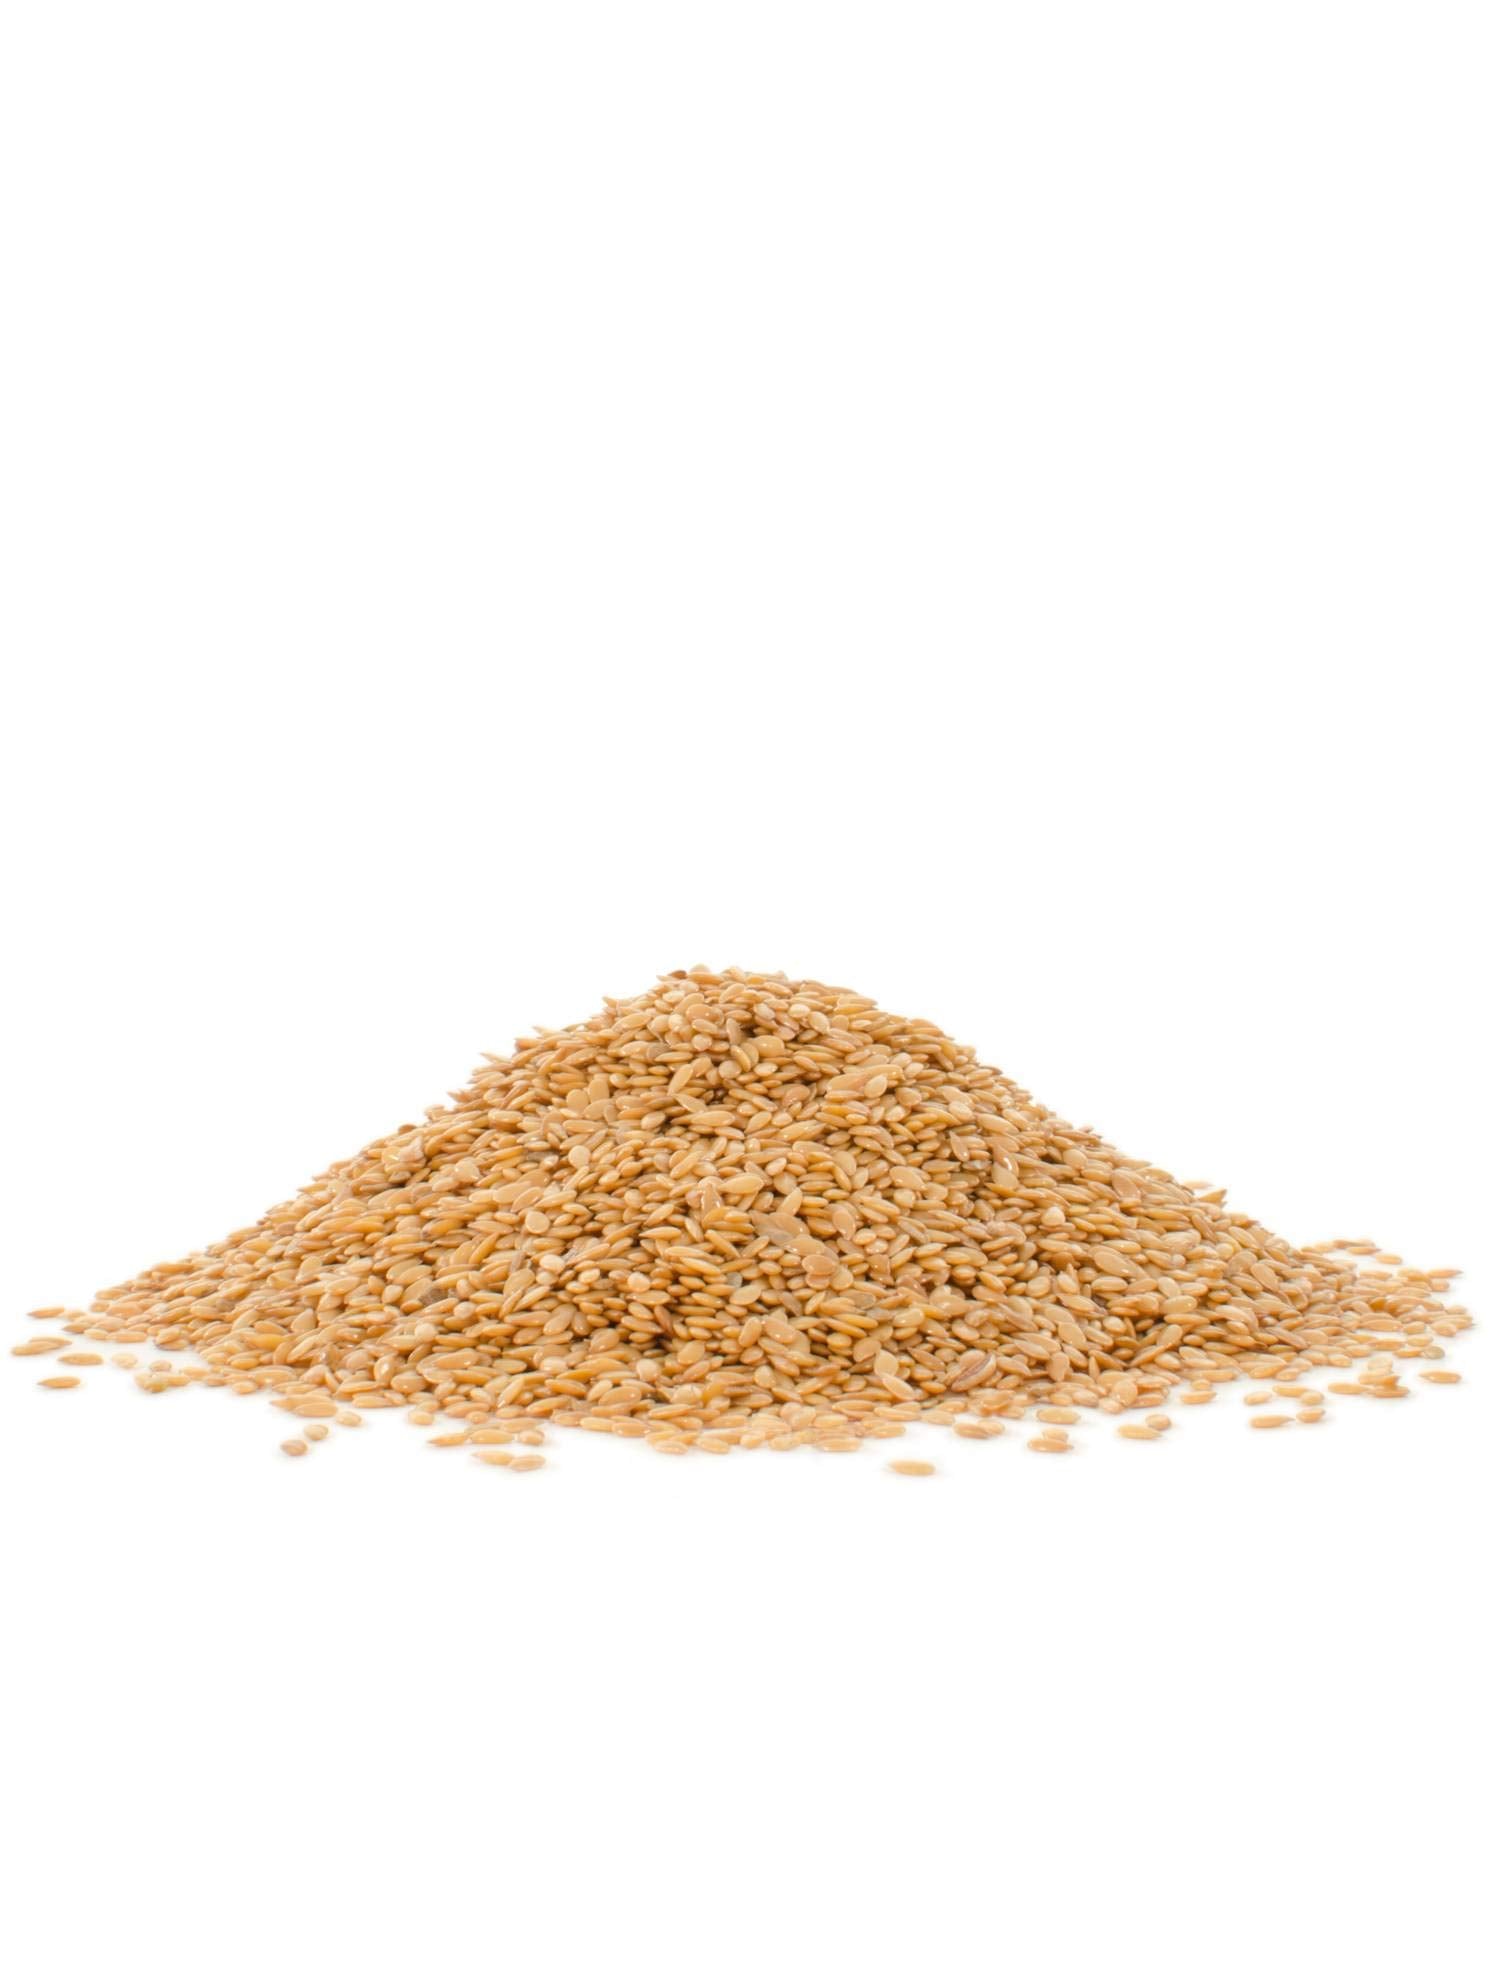 Bobs Red Mill Flaxseed Golden, 13 oz - The Great Shoppe